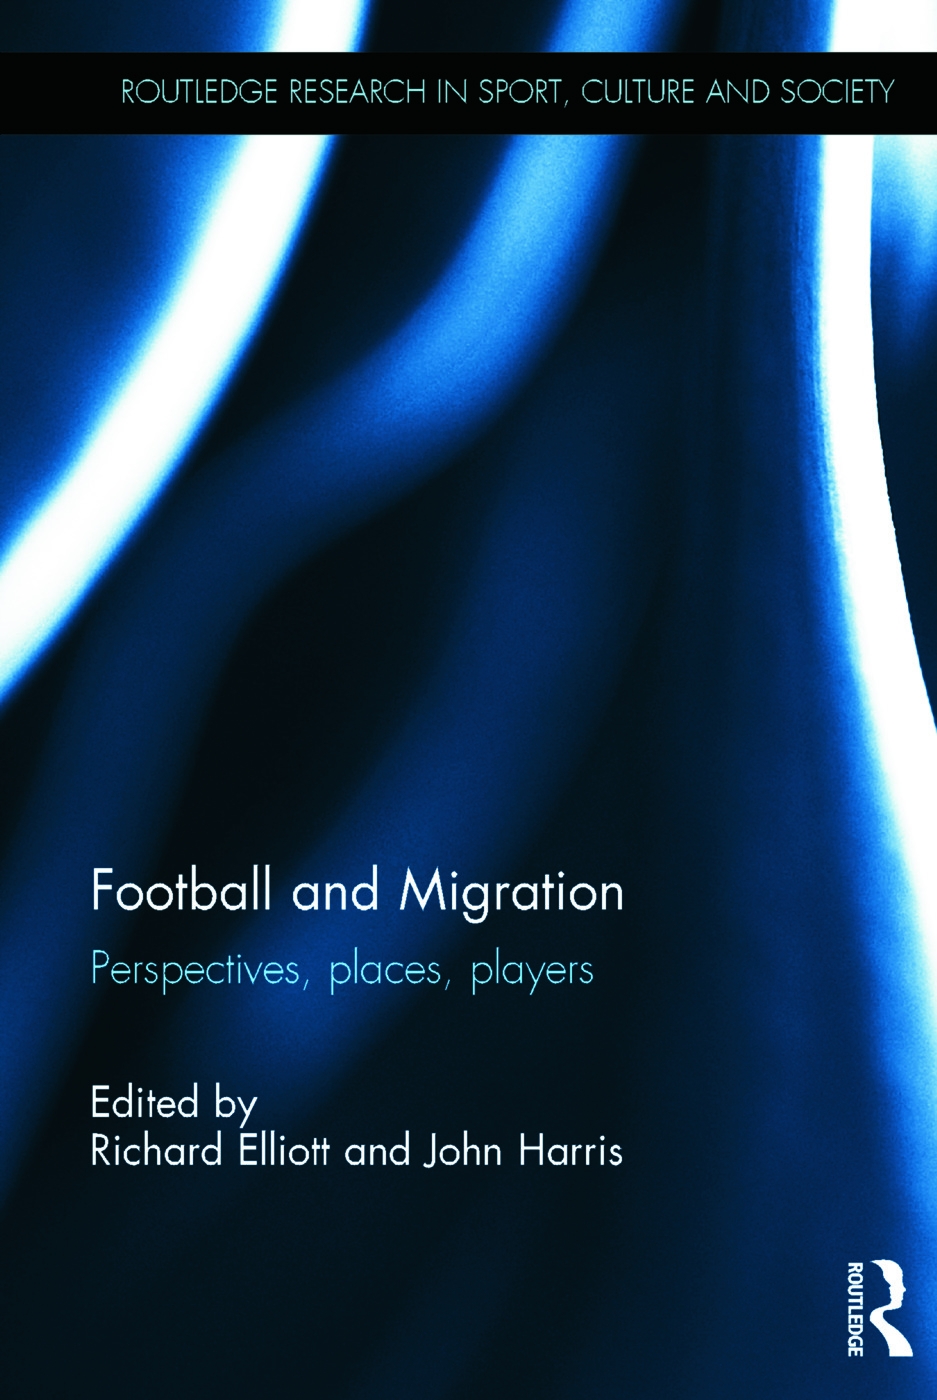 Football and Migration: Perspectives, Places, Players